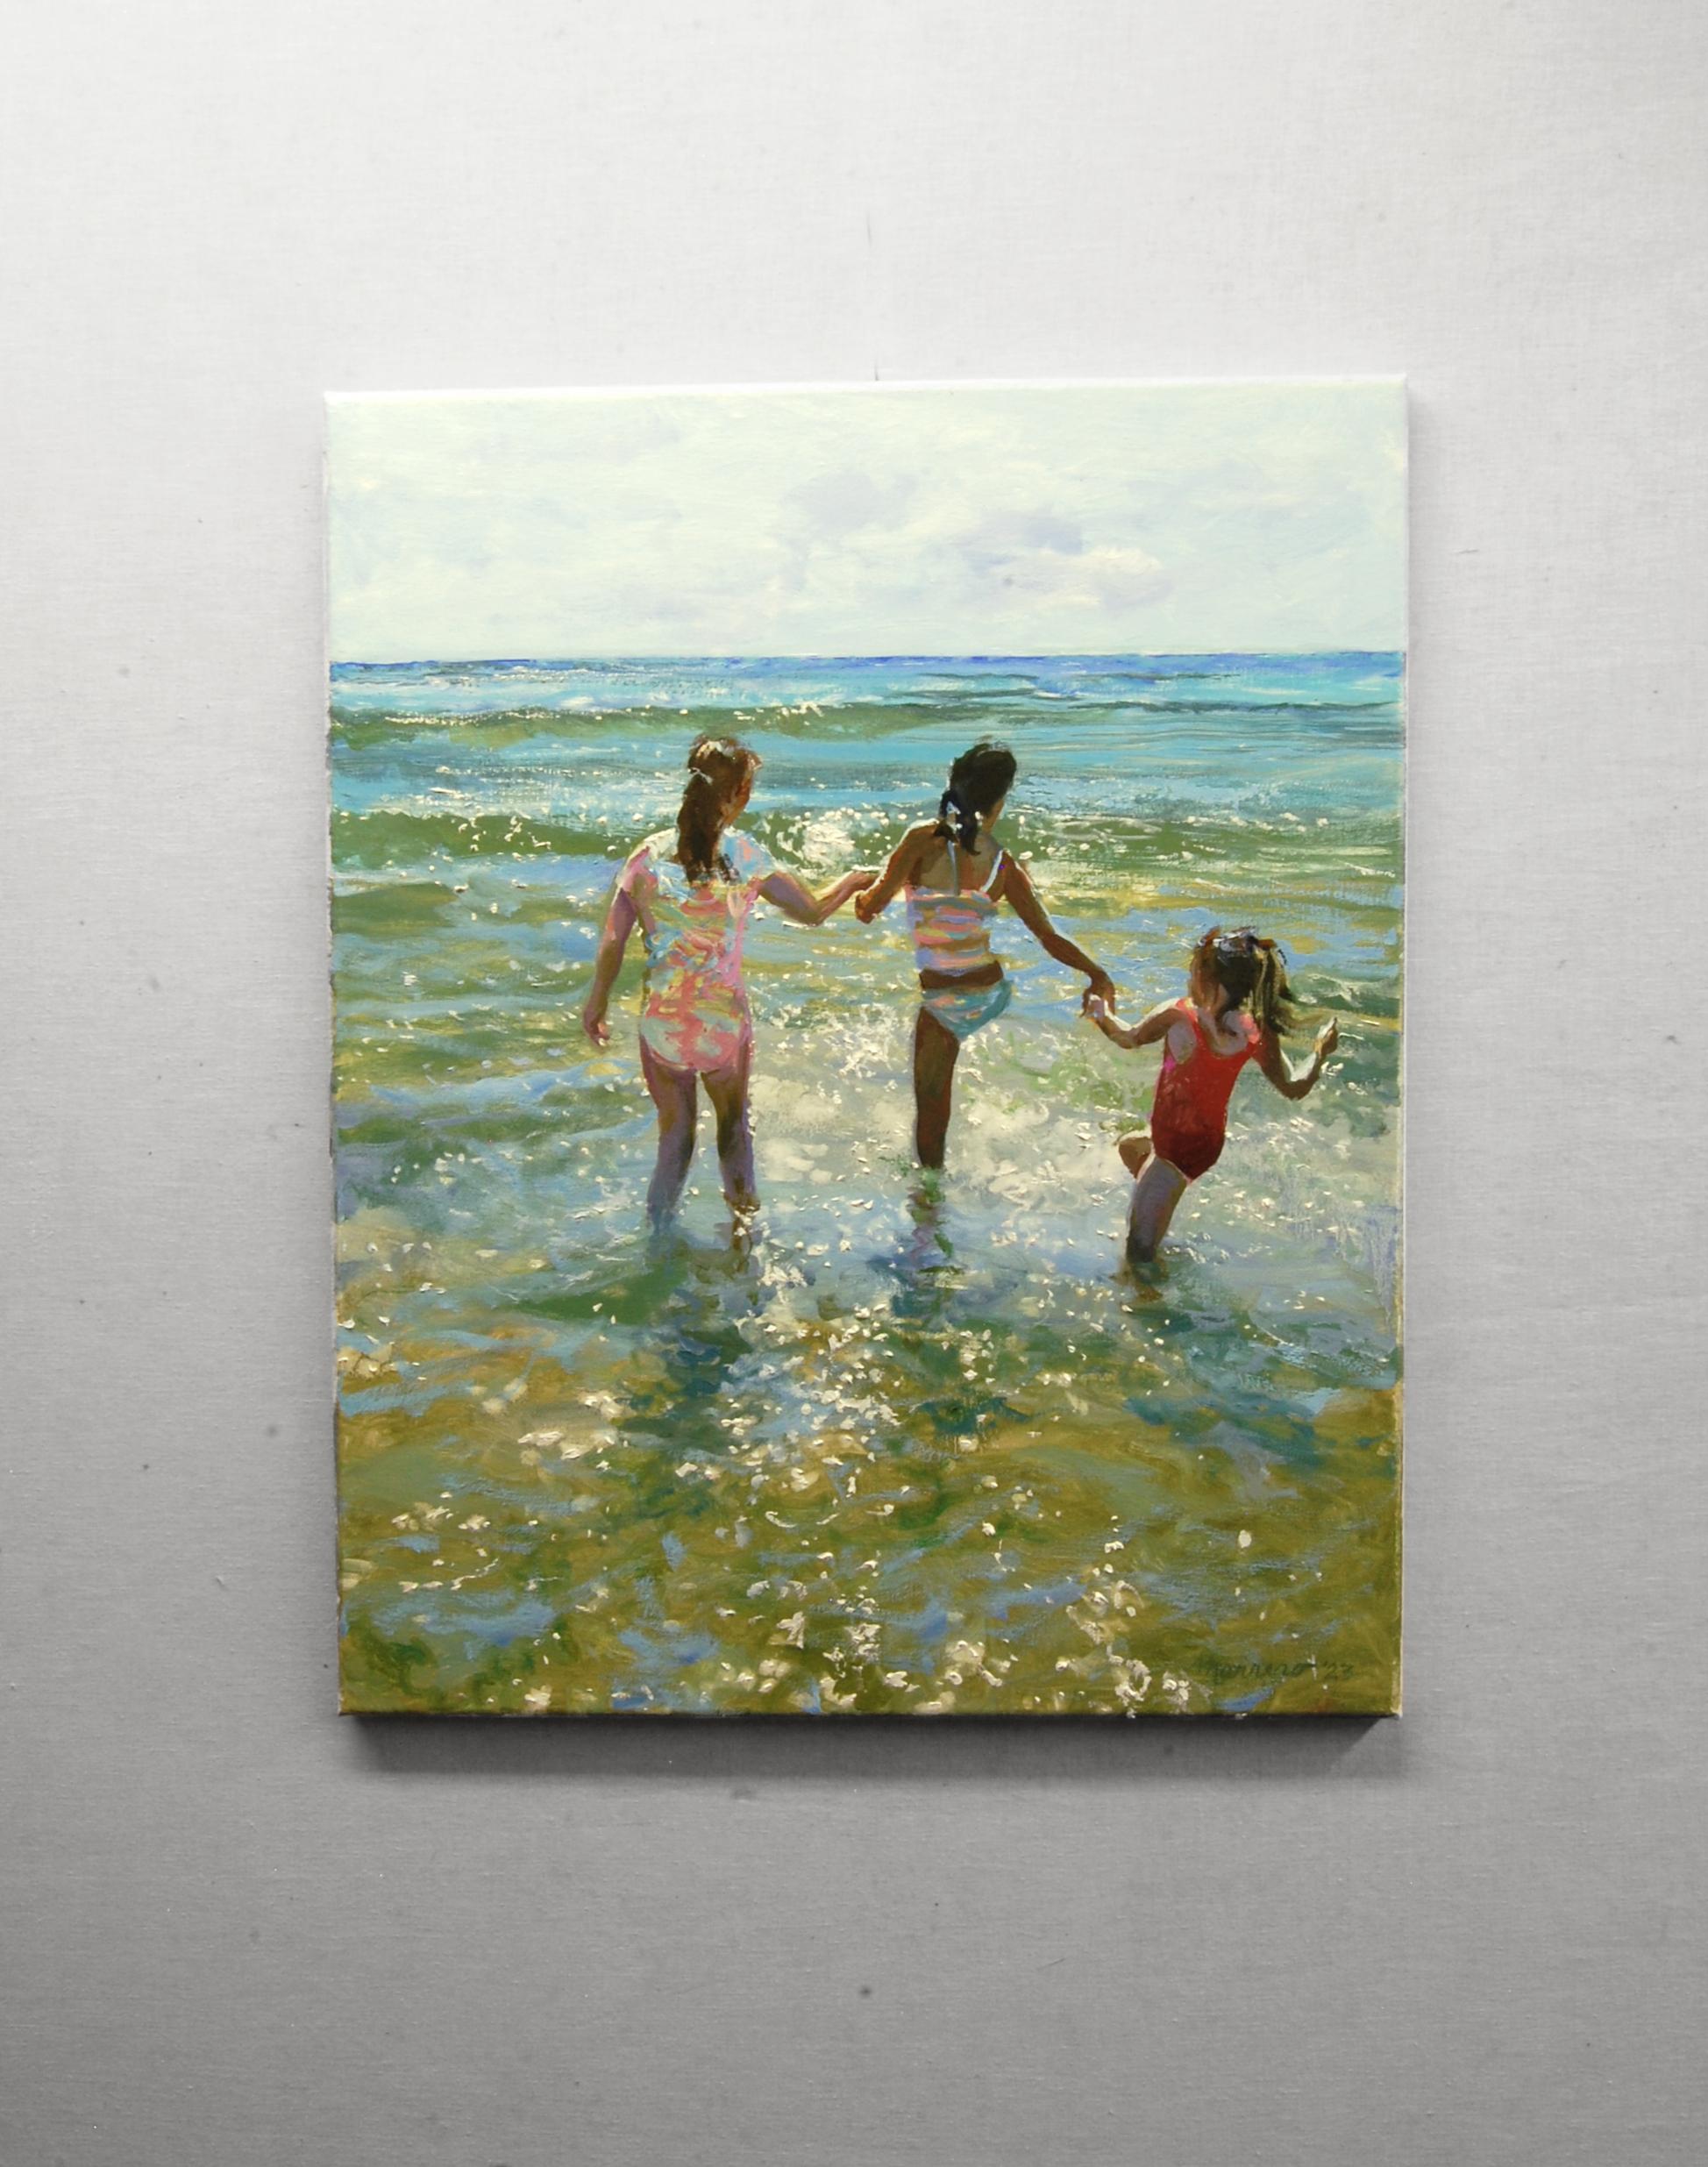 <p>Artist Comments<br>Artist Onelio Marrero paints three little girls splashing in the surf. His execution gives evidence of the influence of Sorolla's paintings of similar subjects. The movement and reflections on the water come alive in brilliant